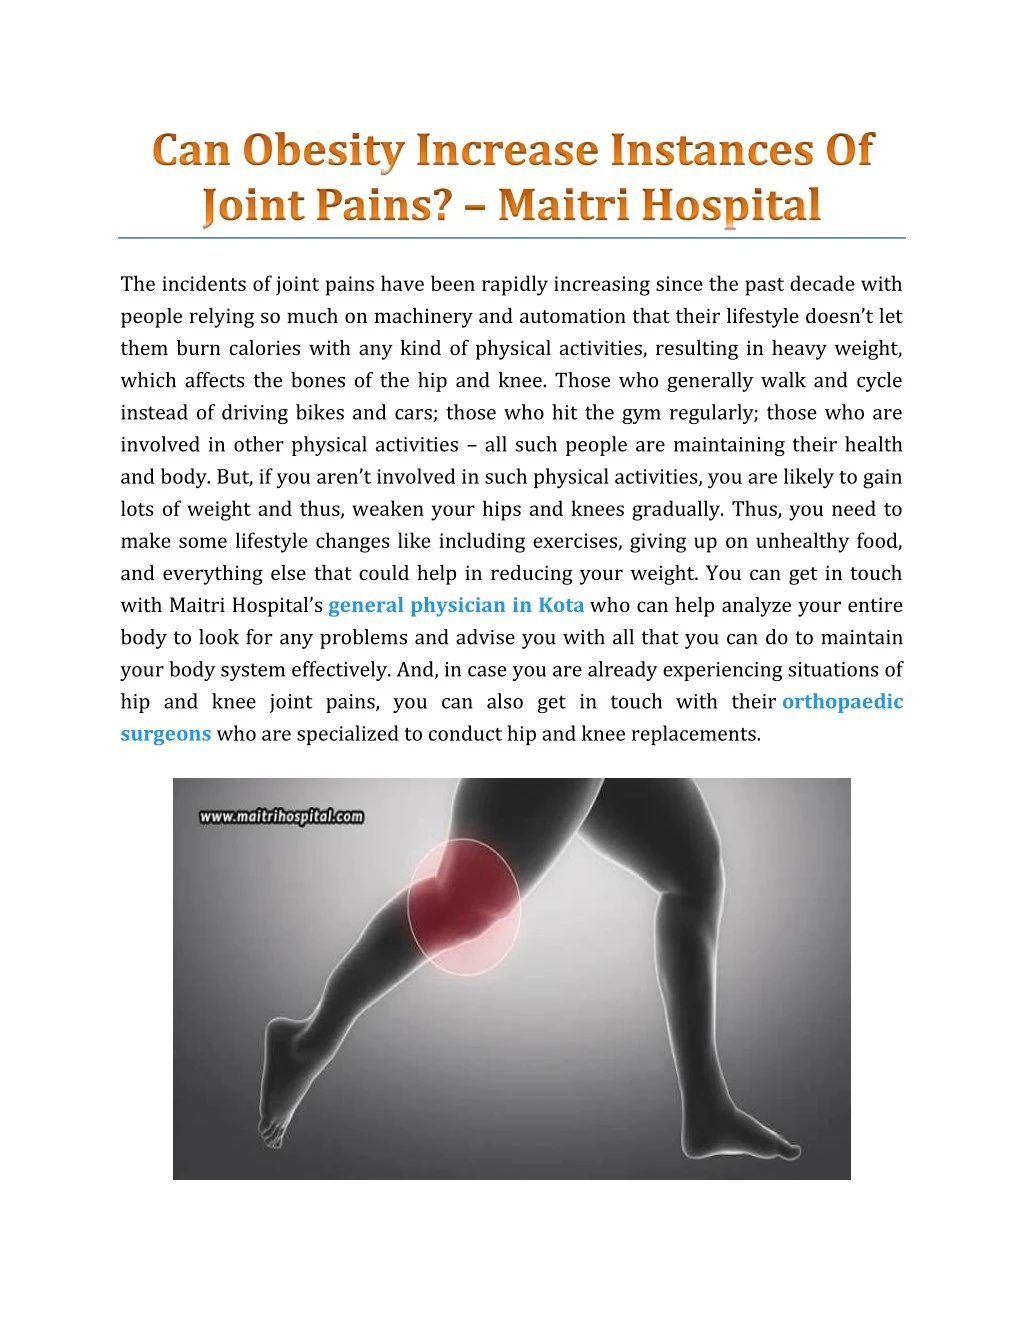 the incidents of joint pains have been rapidly